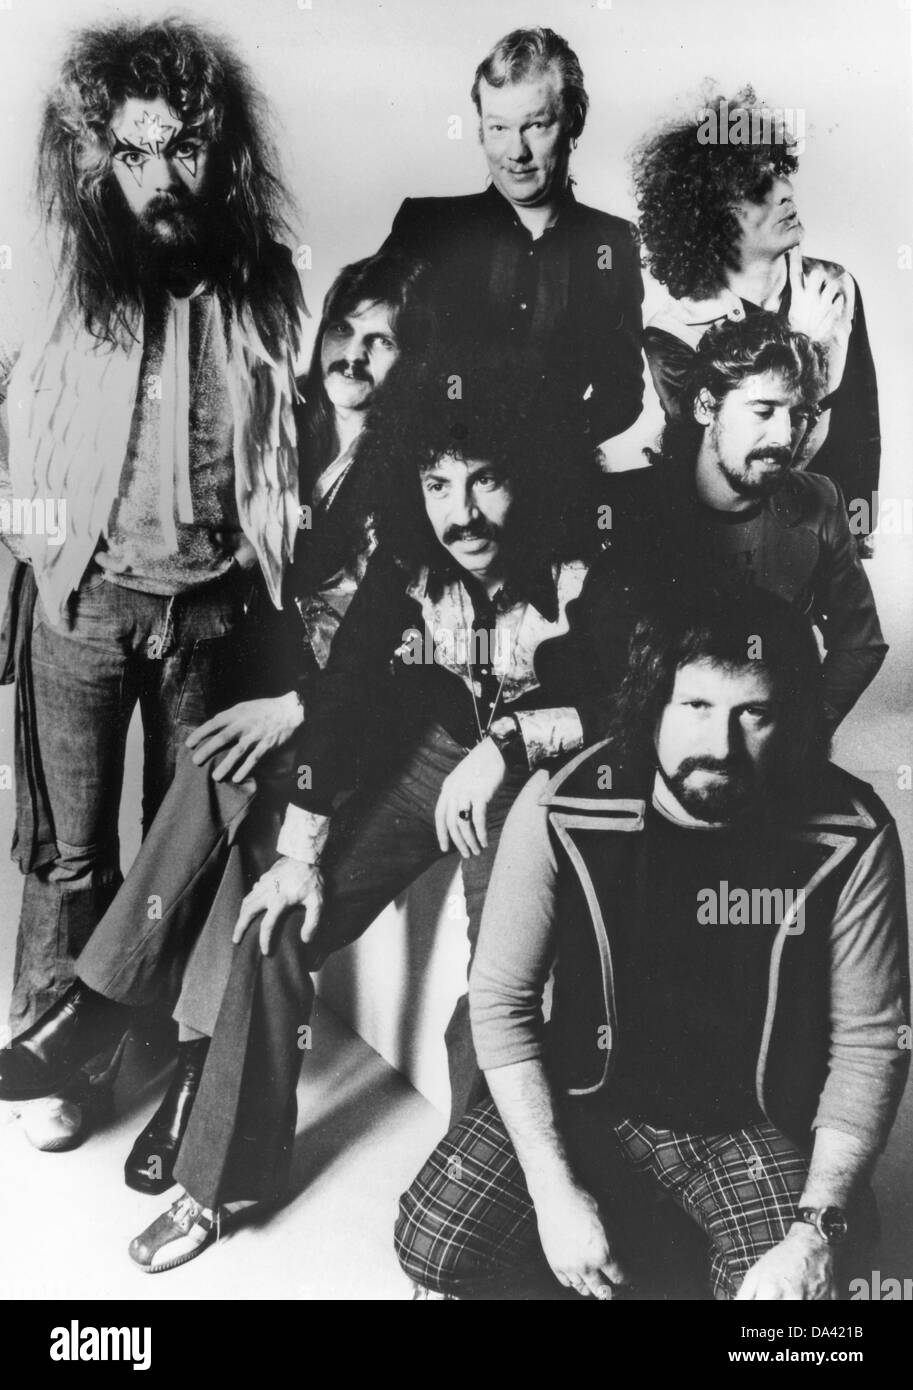 WIZZARD Promotional photo of UK pop group about 1974 with Roy Wood top left Stock Photo